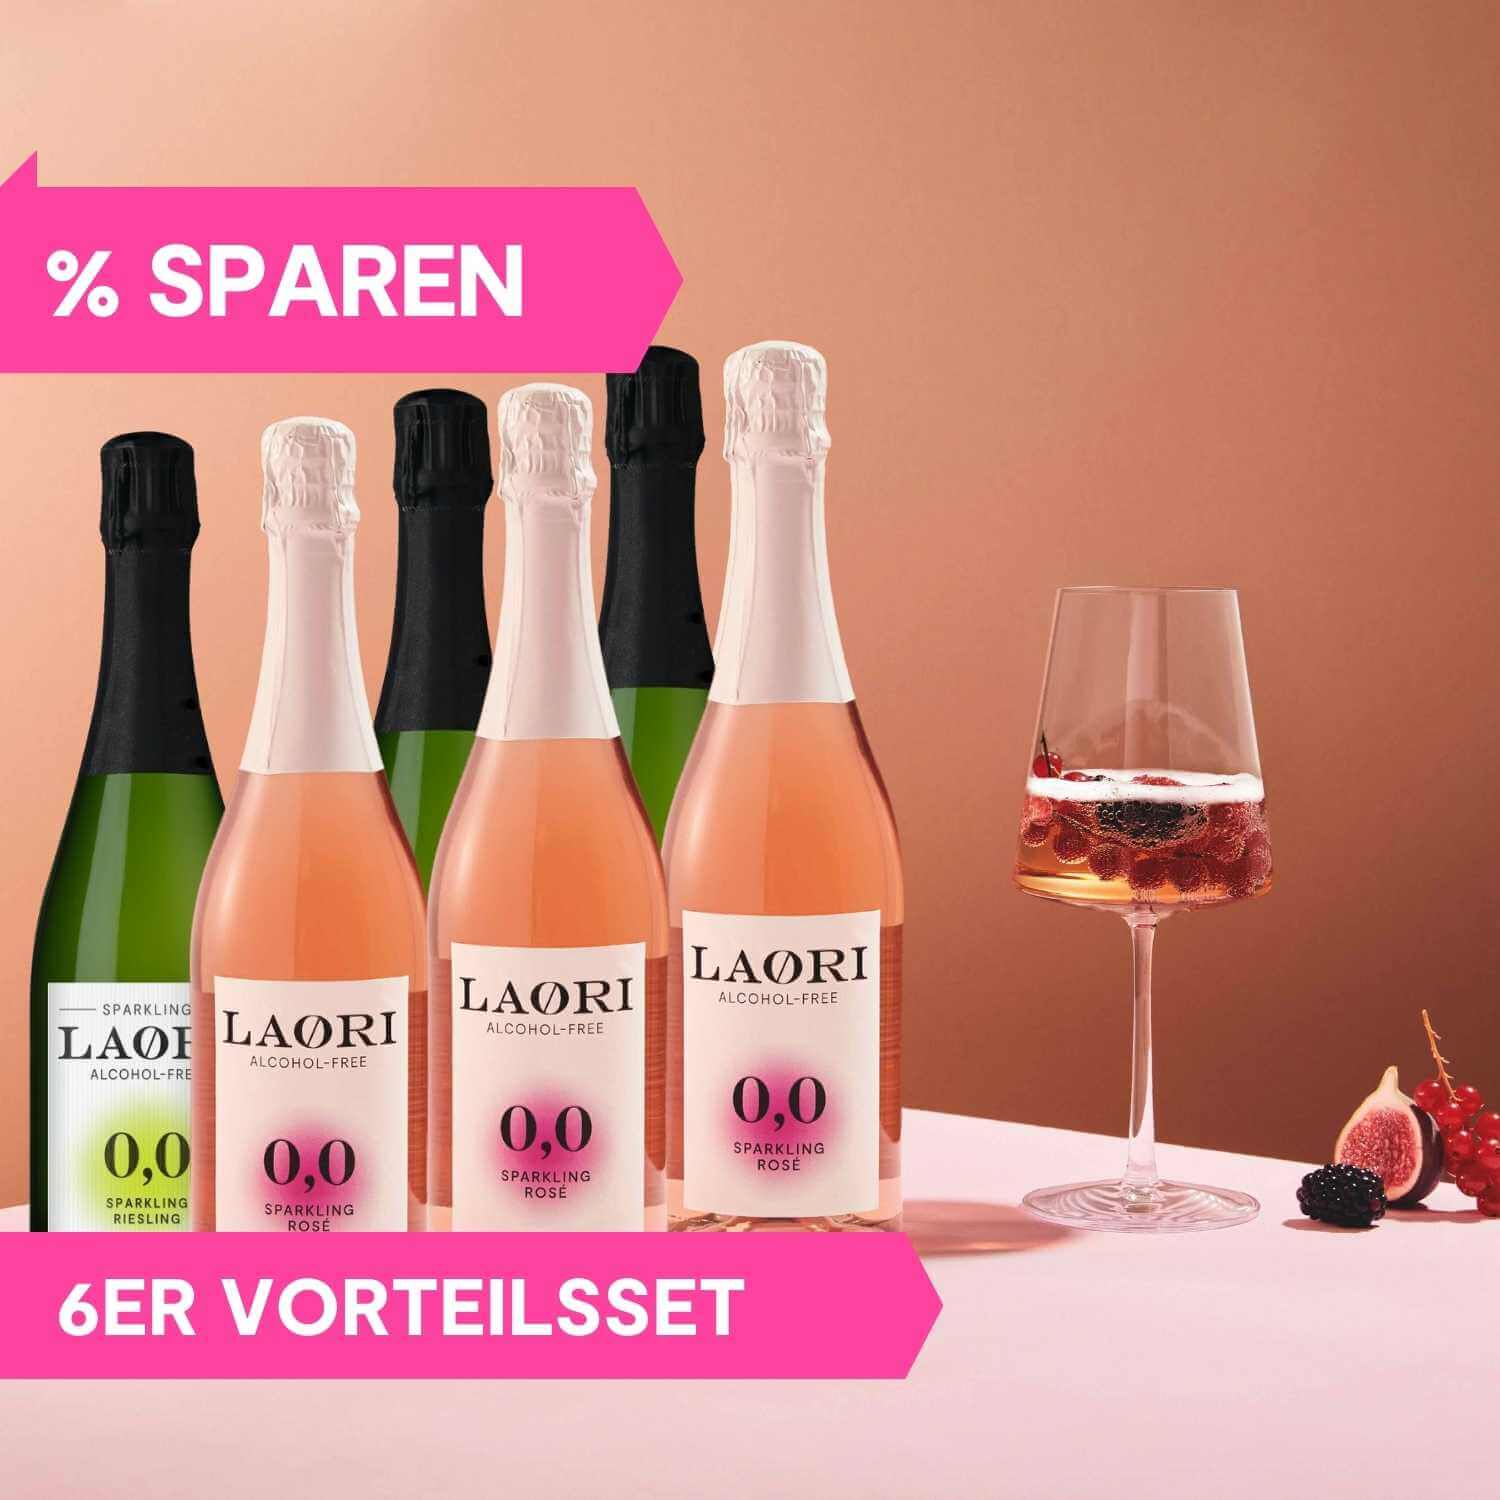 Ultimate Collection X 6: 3x Sparkling Riesling + 3x Sparkling Rosé (0,75L)